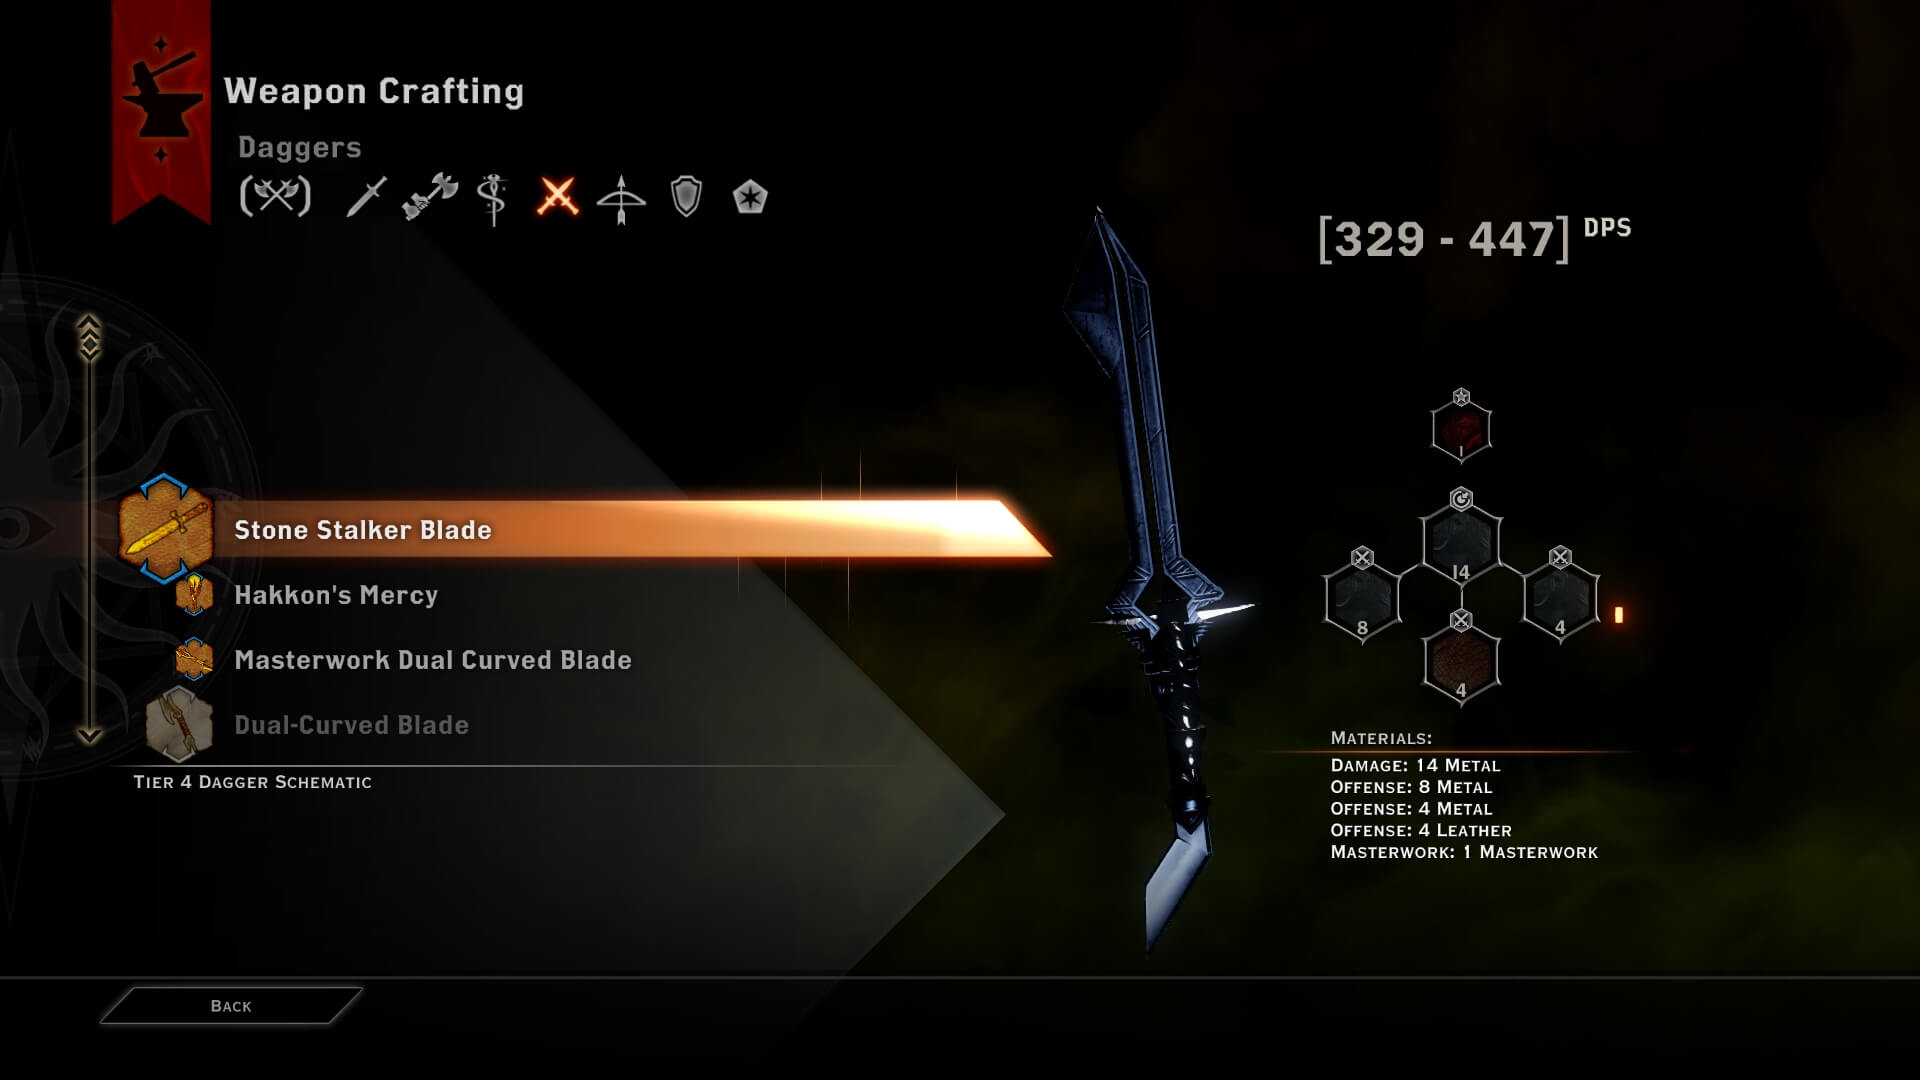 Dragon Age Guide to the Best Weapons | Dragon Inquisition